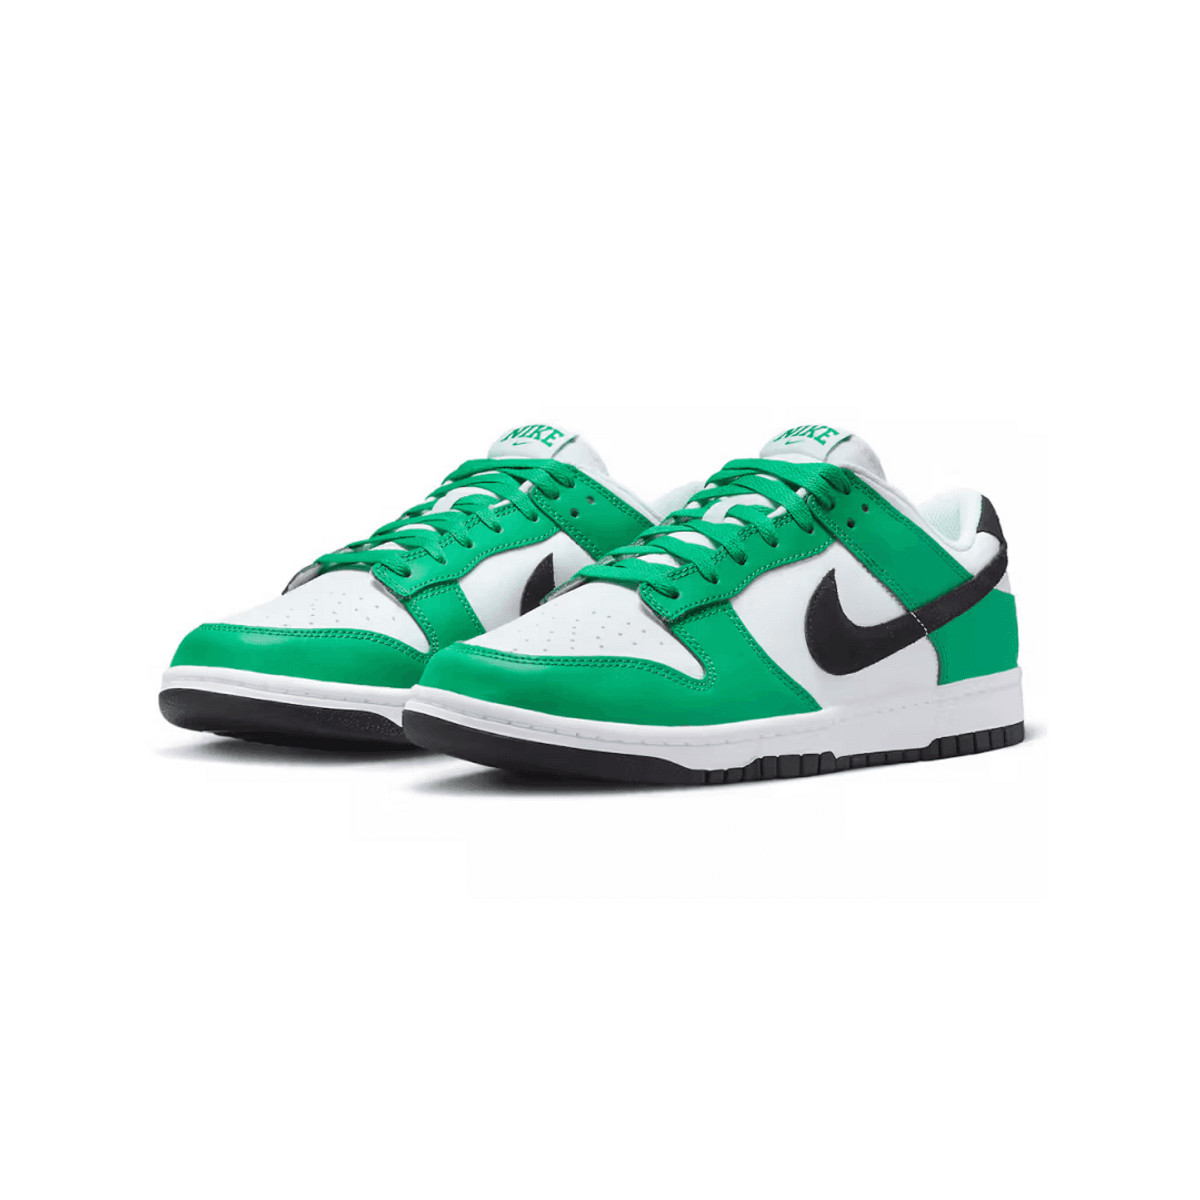 Feel The Luck In The Nike Dunk Low Celtics